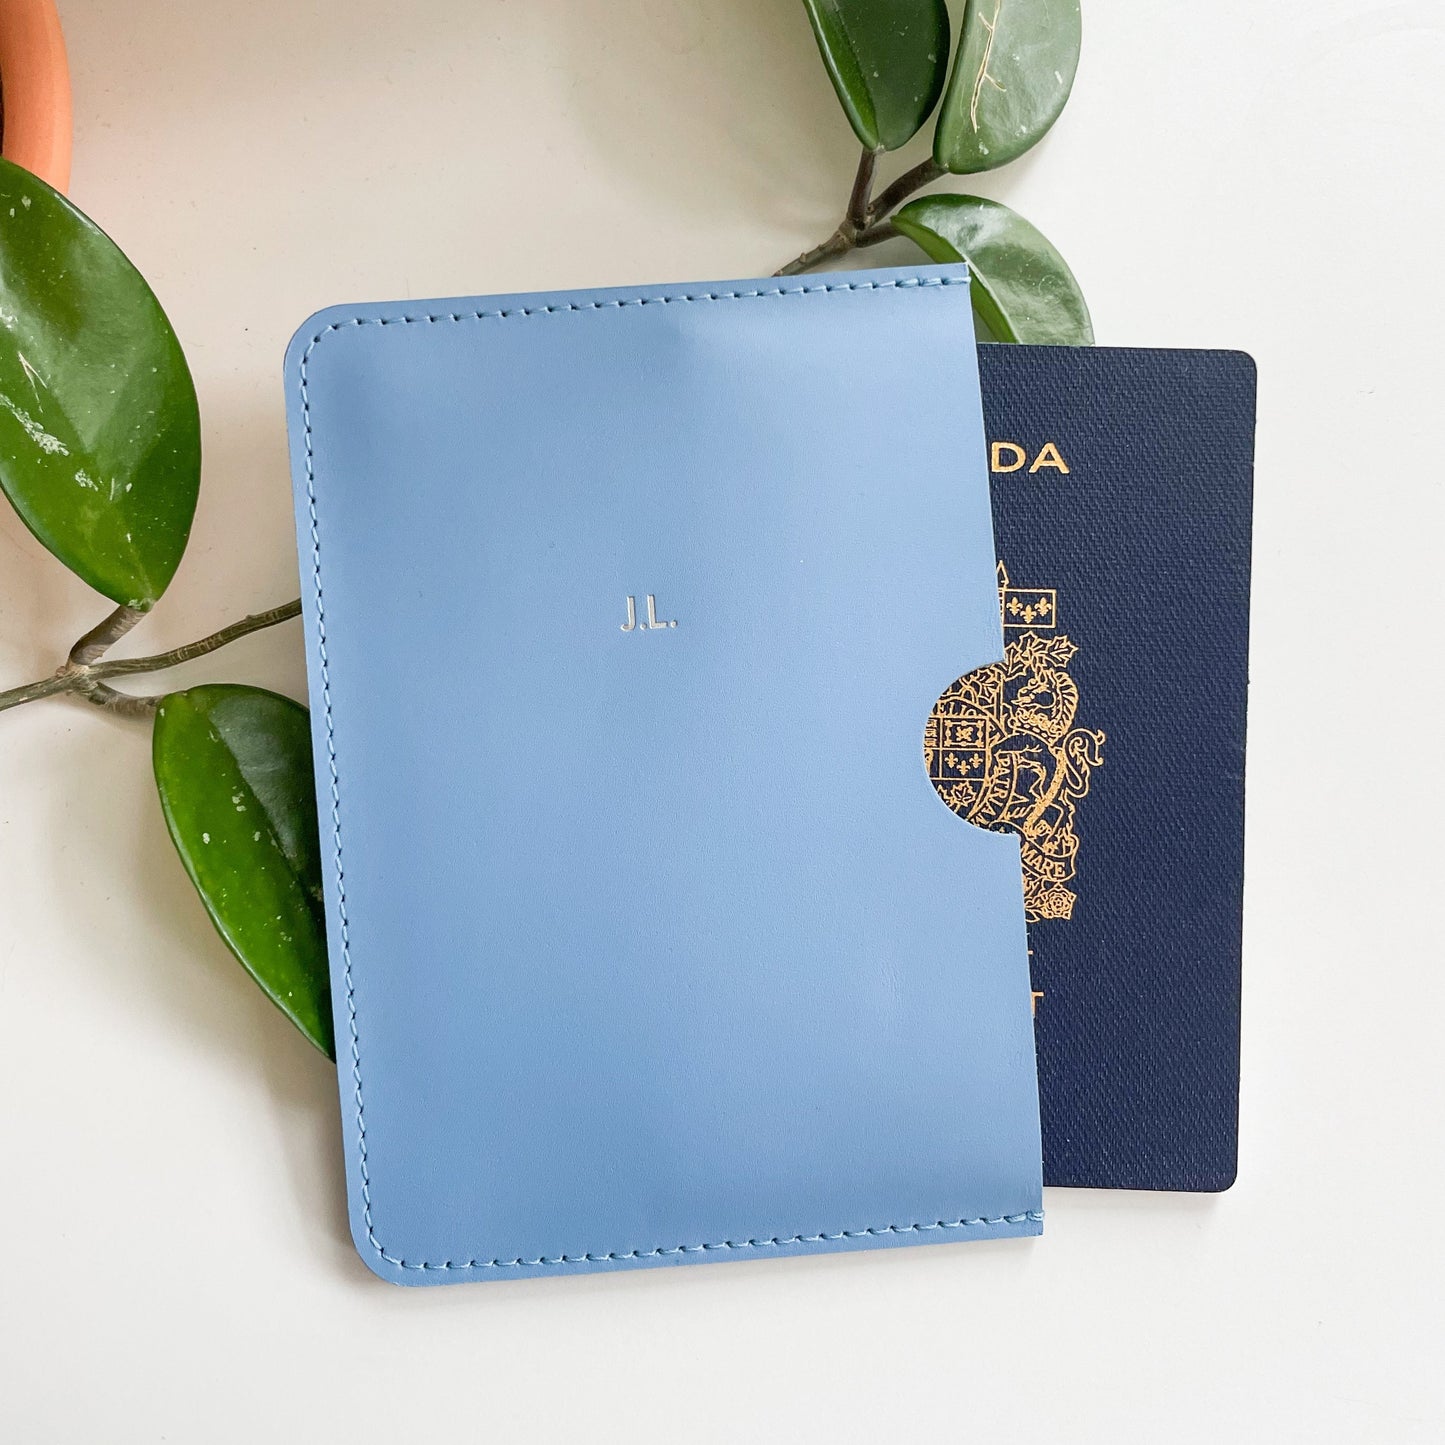 Passport Sleeve with Card Pocket | Lavender